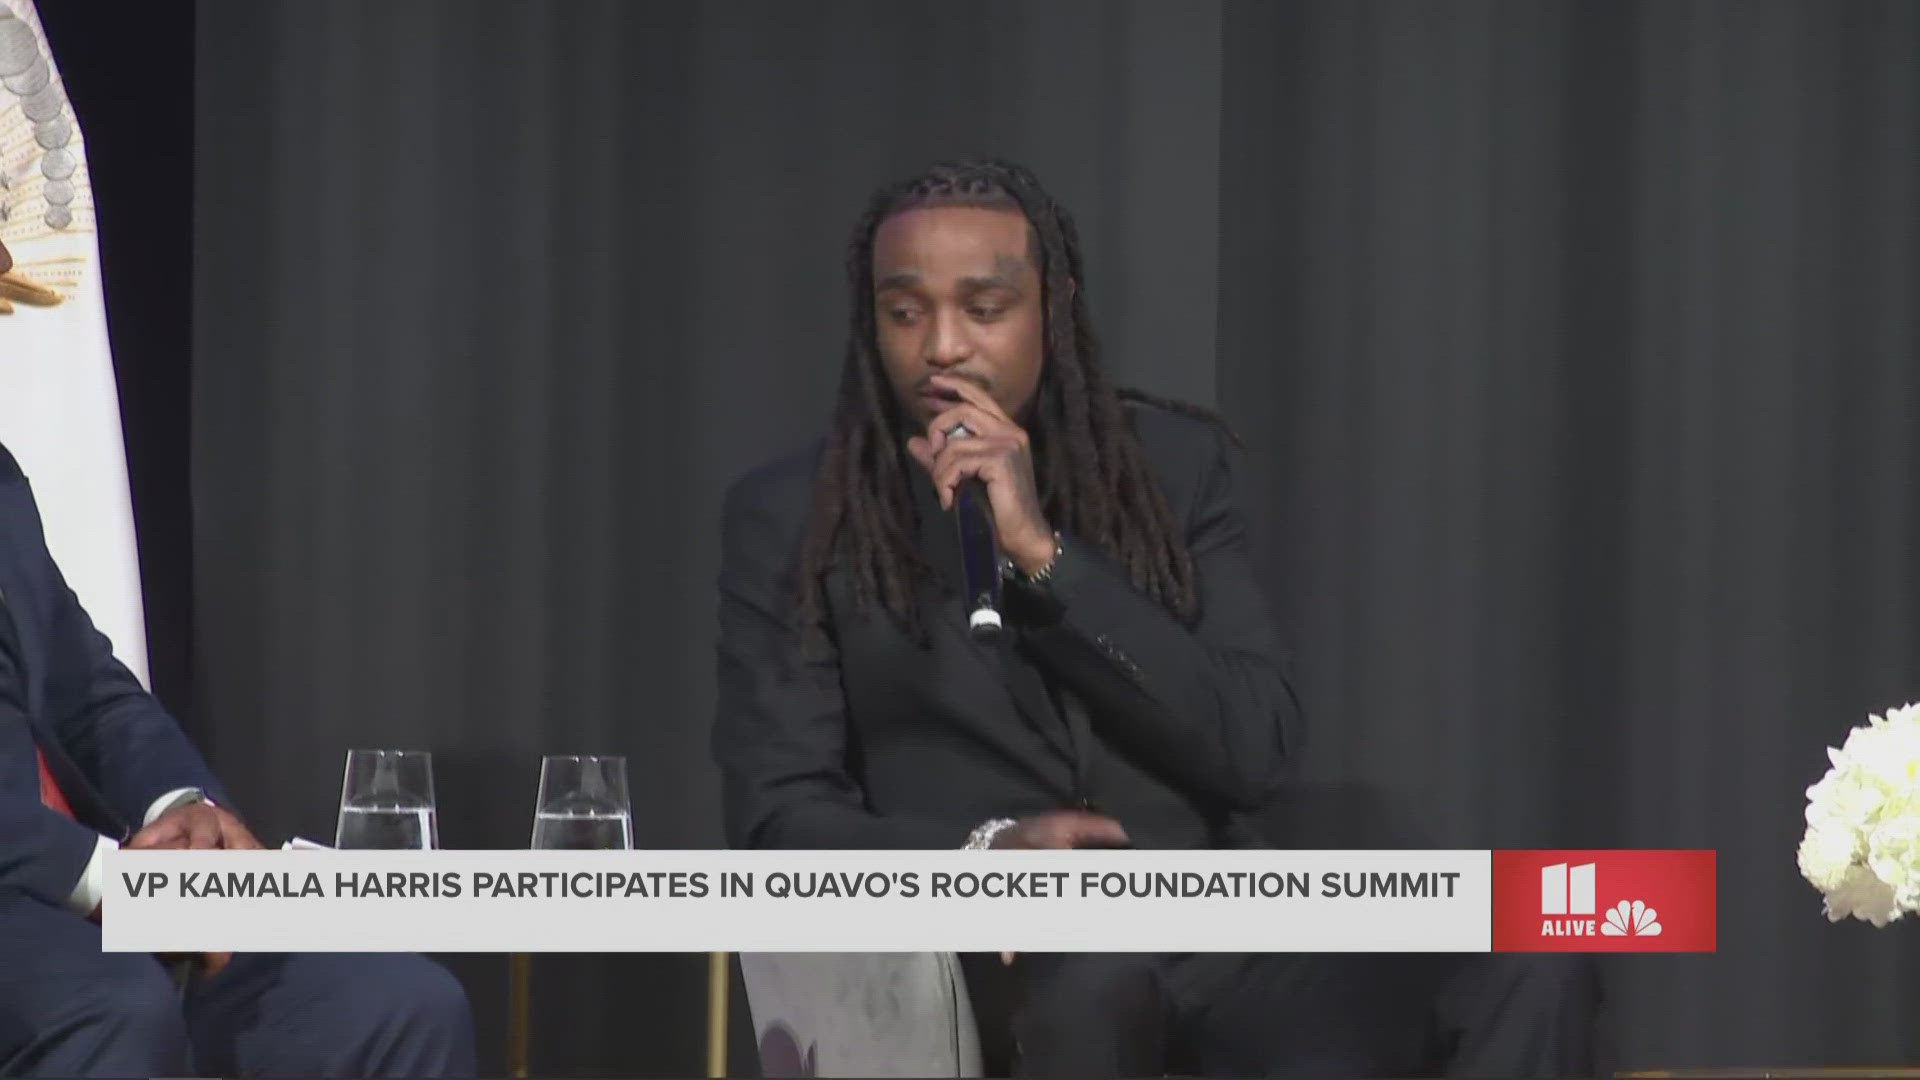 At the Rocket Foundation Summit, Quavo spoke on why gun violence prevention efforts are important to him after the death of Takeoff.